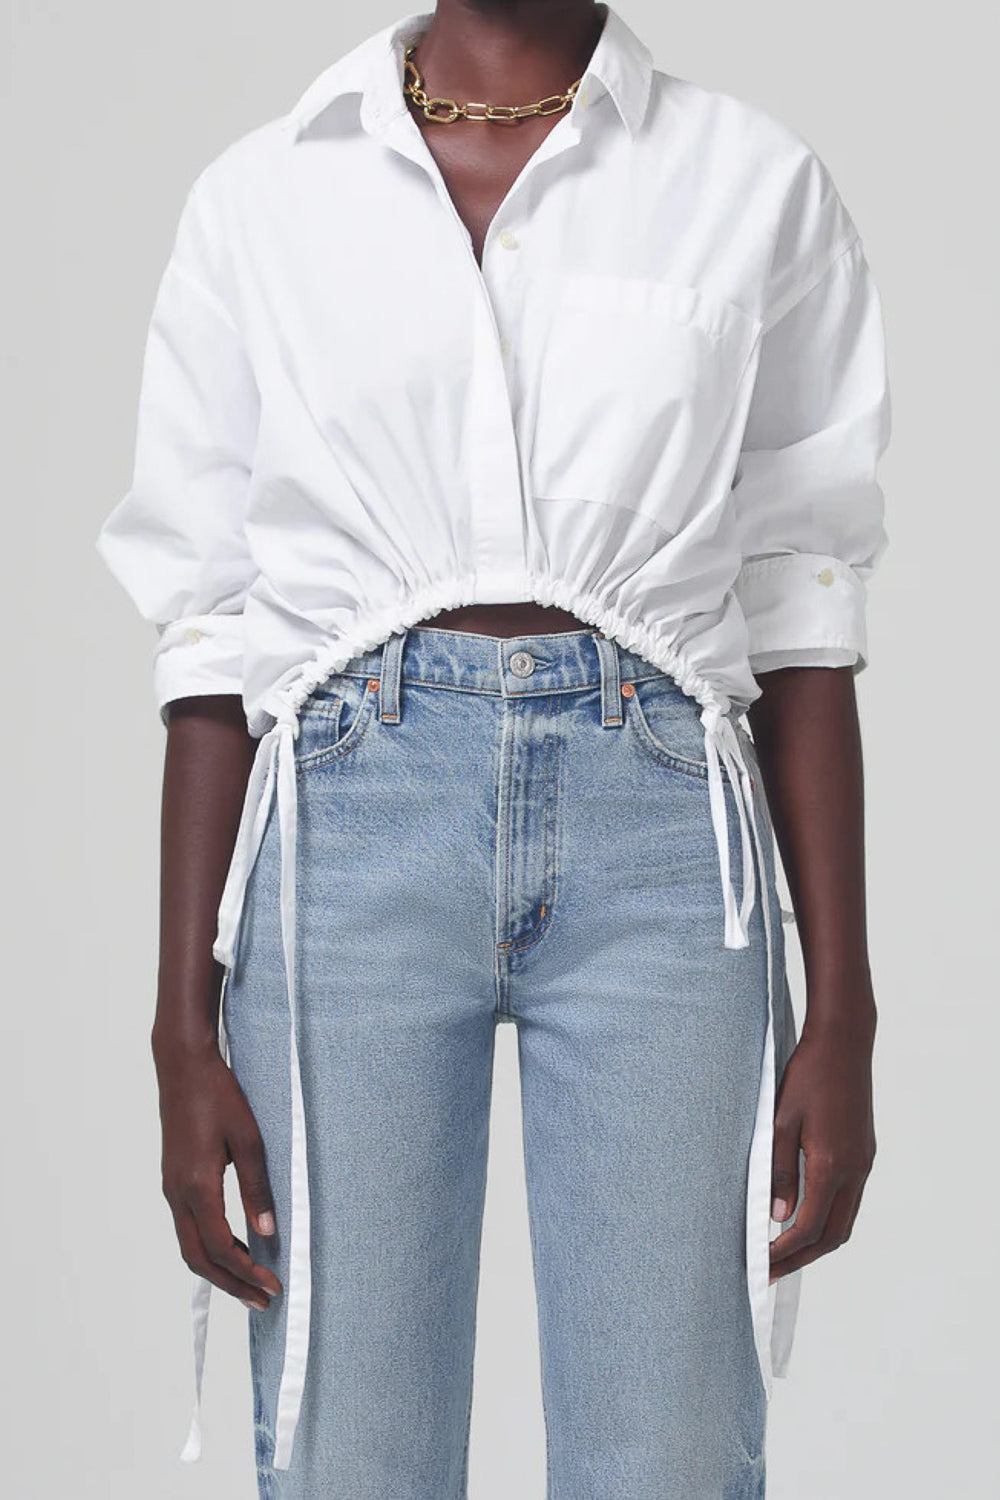 citizens of humanity alexandra top white